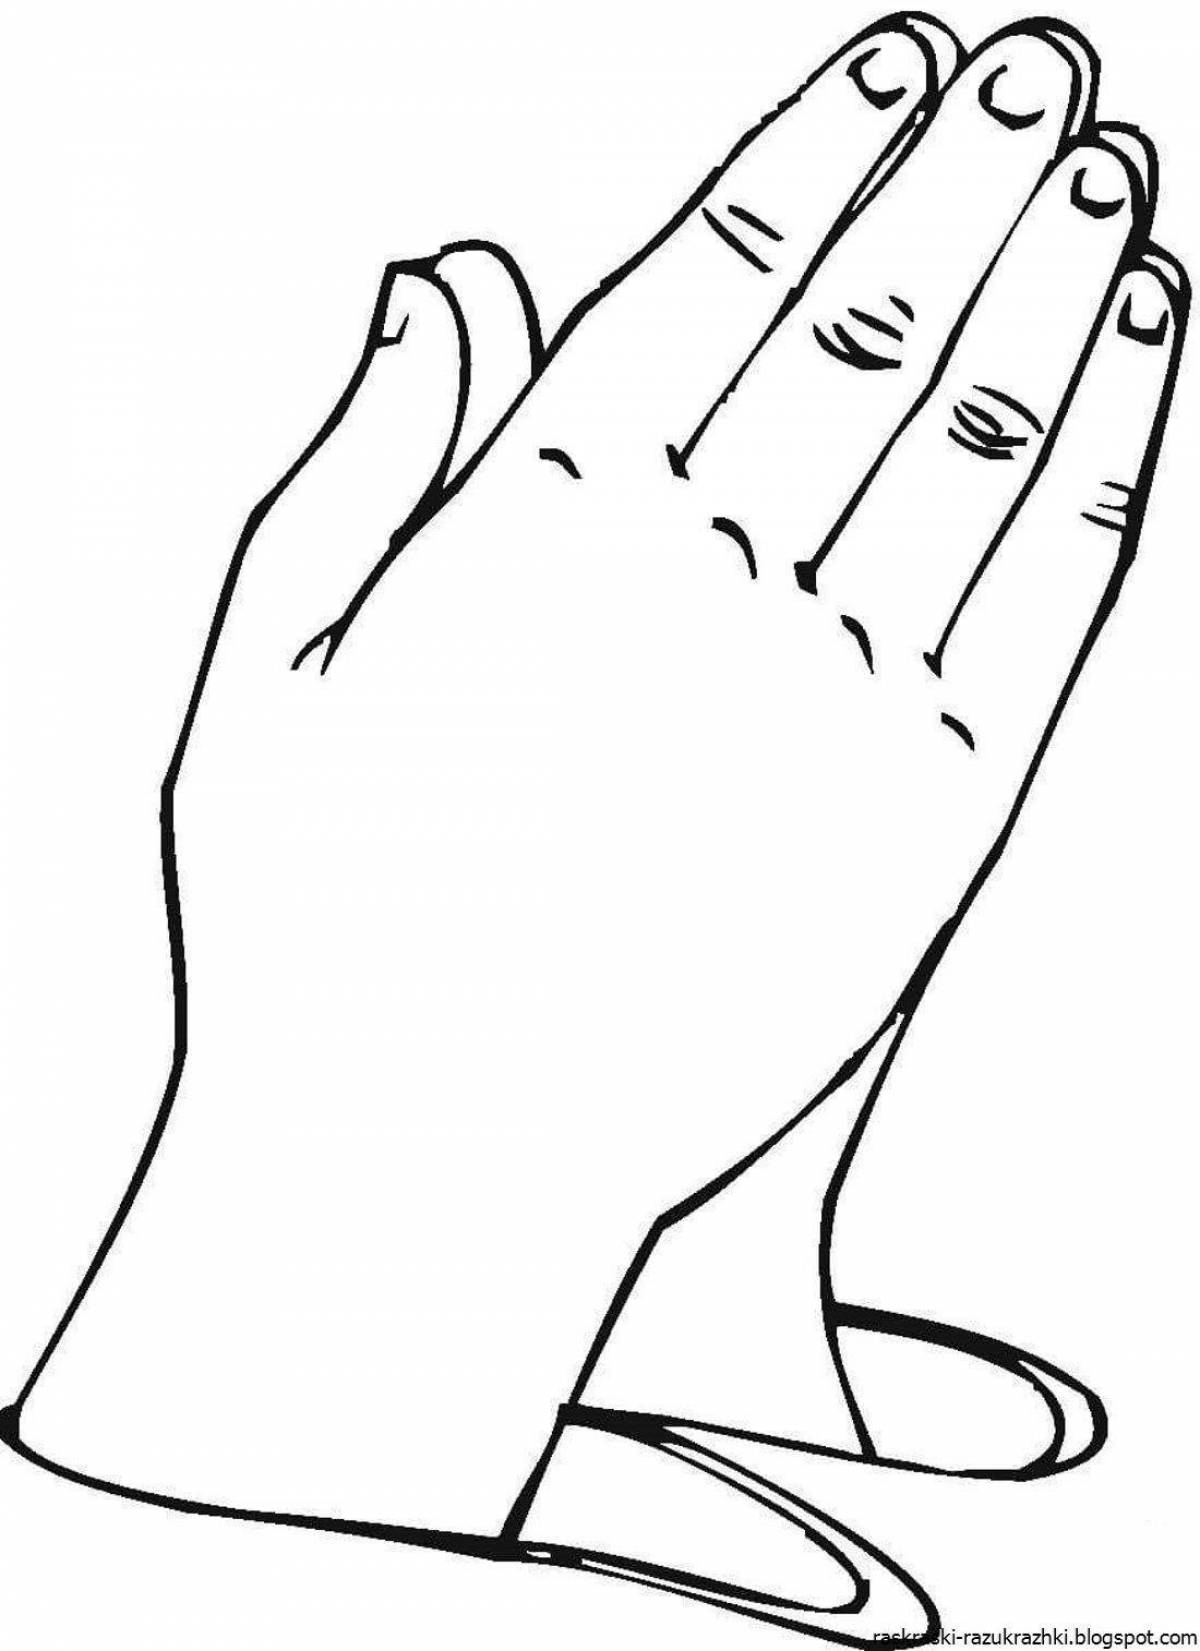 Playful Wednesday hand coloring page